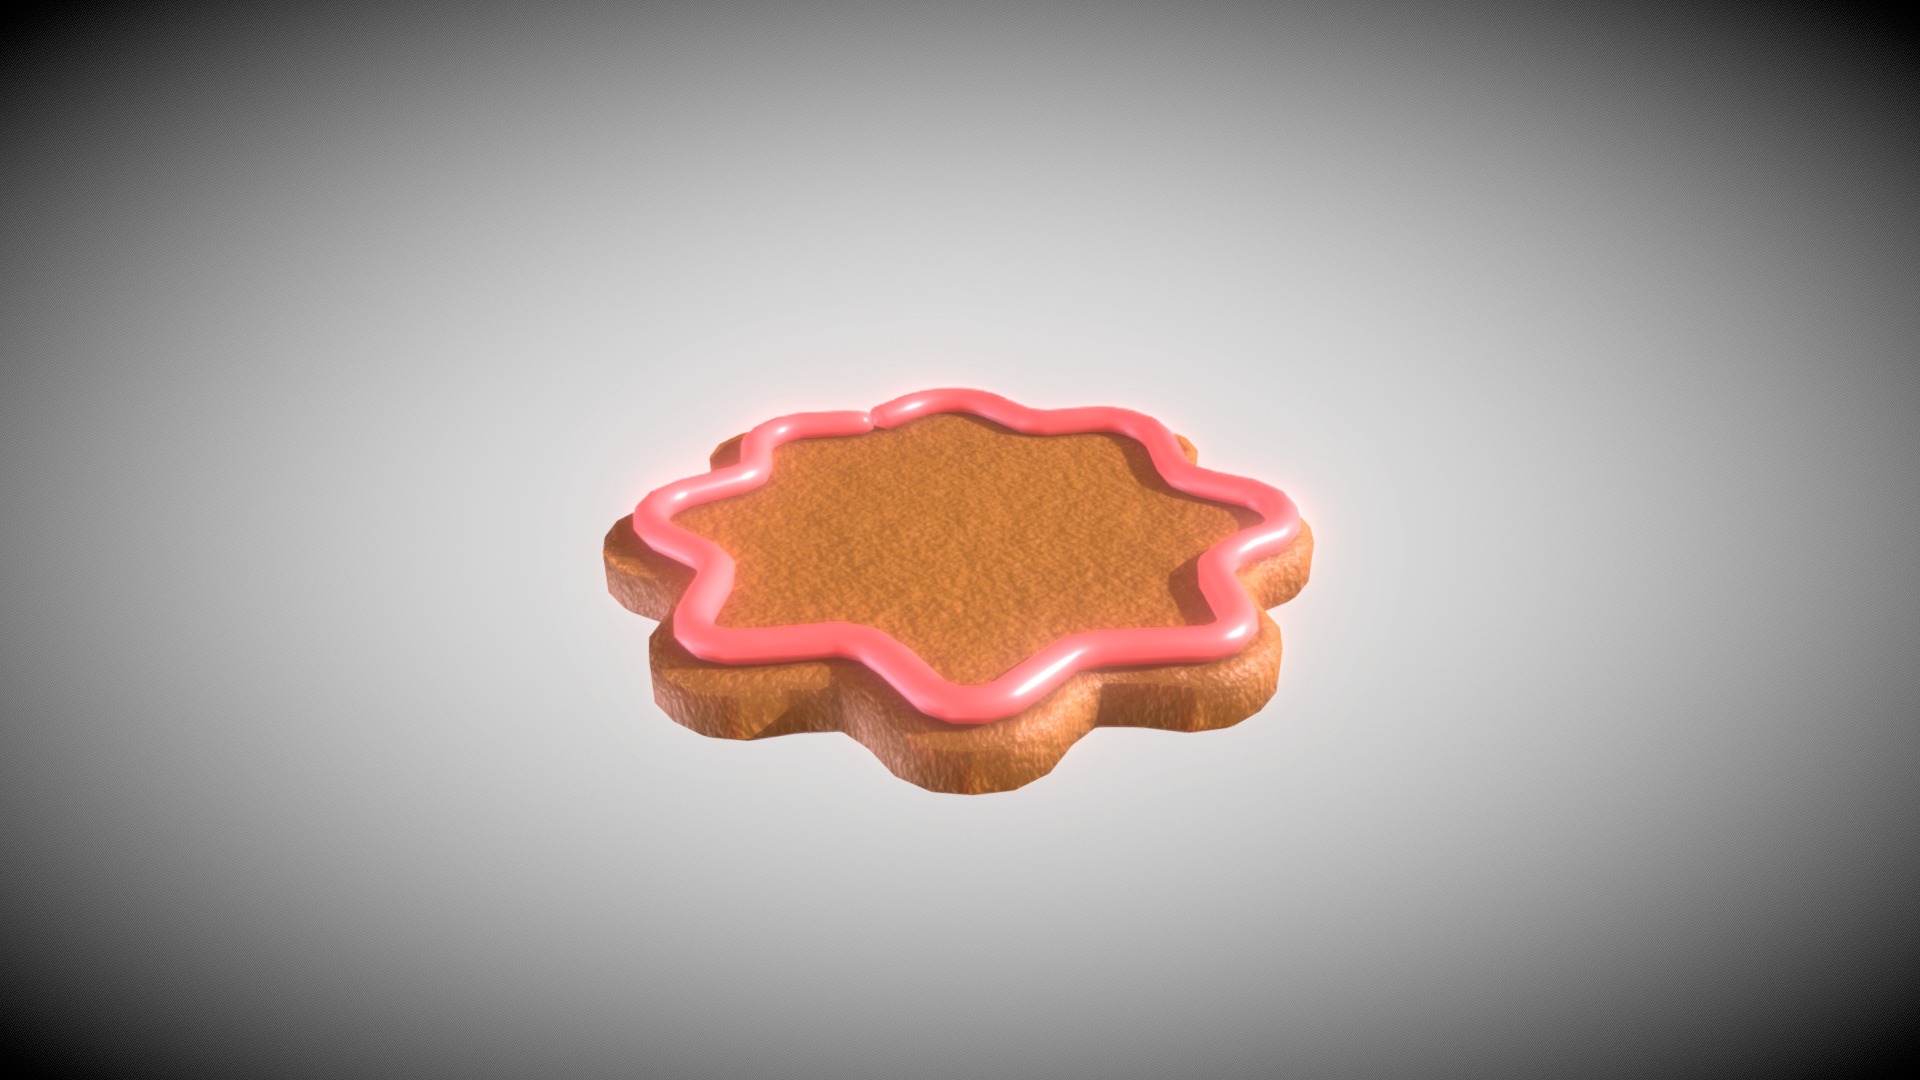 3D model Gingerbread with pink decoration - This is a 3D model of the Gingerbread with pink decoration. The 3D model is about a red and white sea creature.